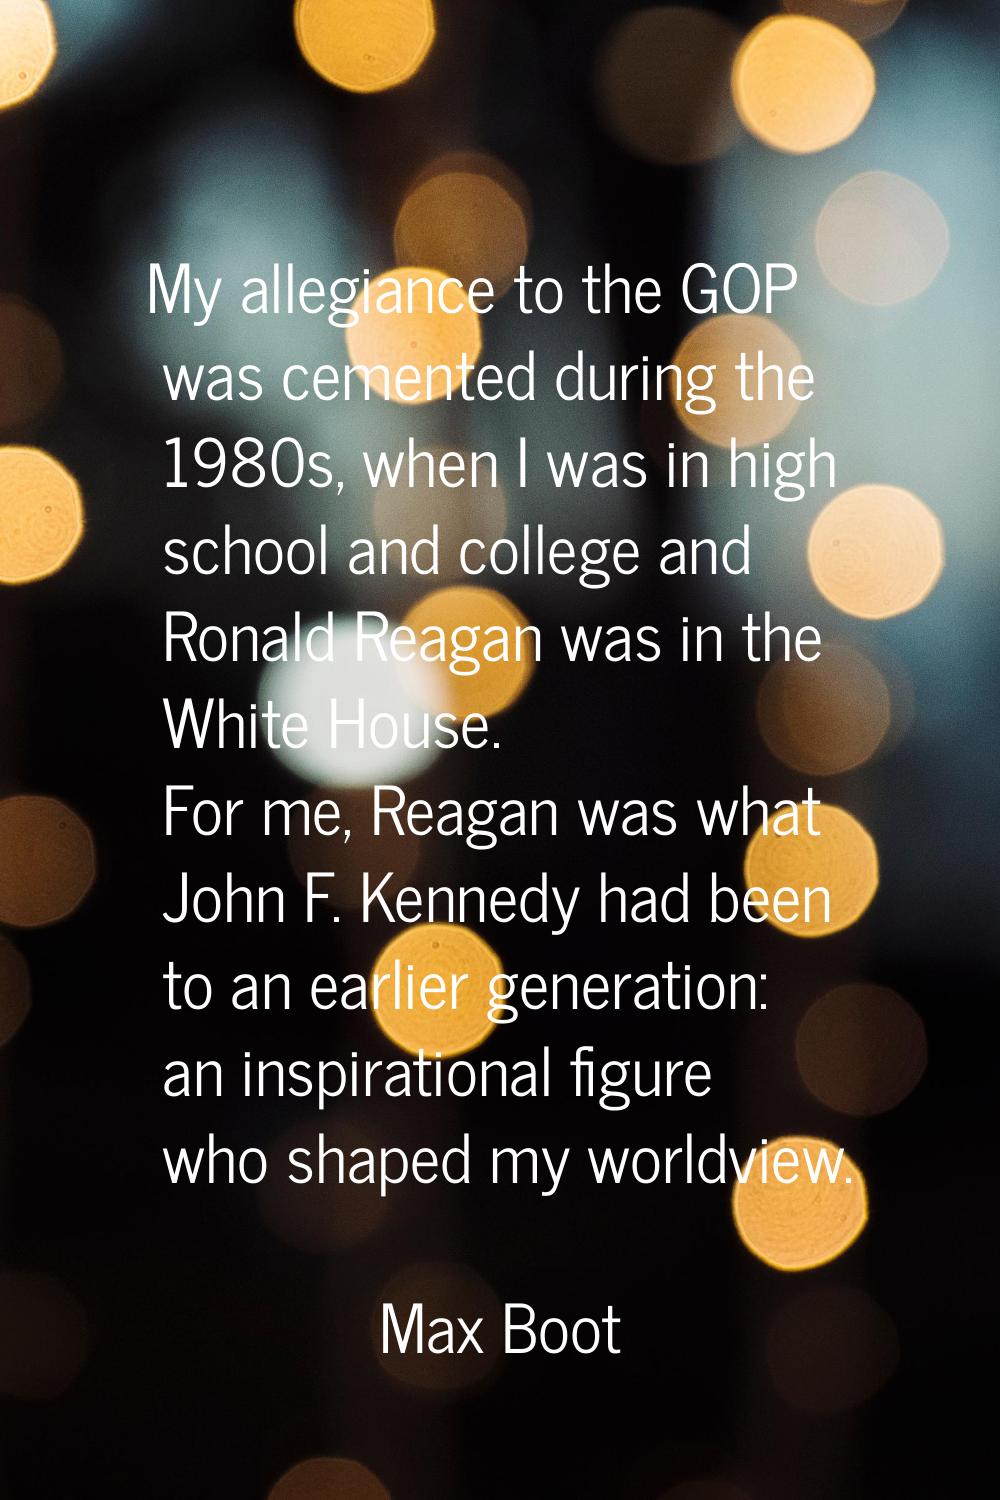 My allegiance to the GOP was cemented during the 1980s, when I was in high school and college and R